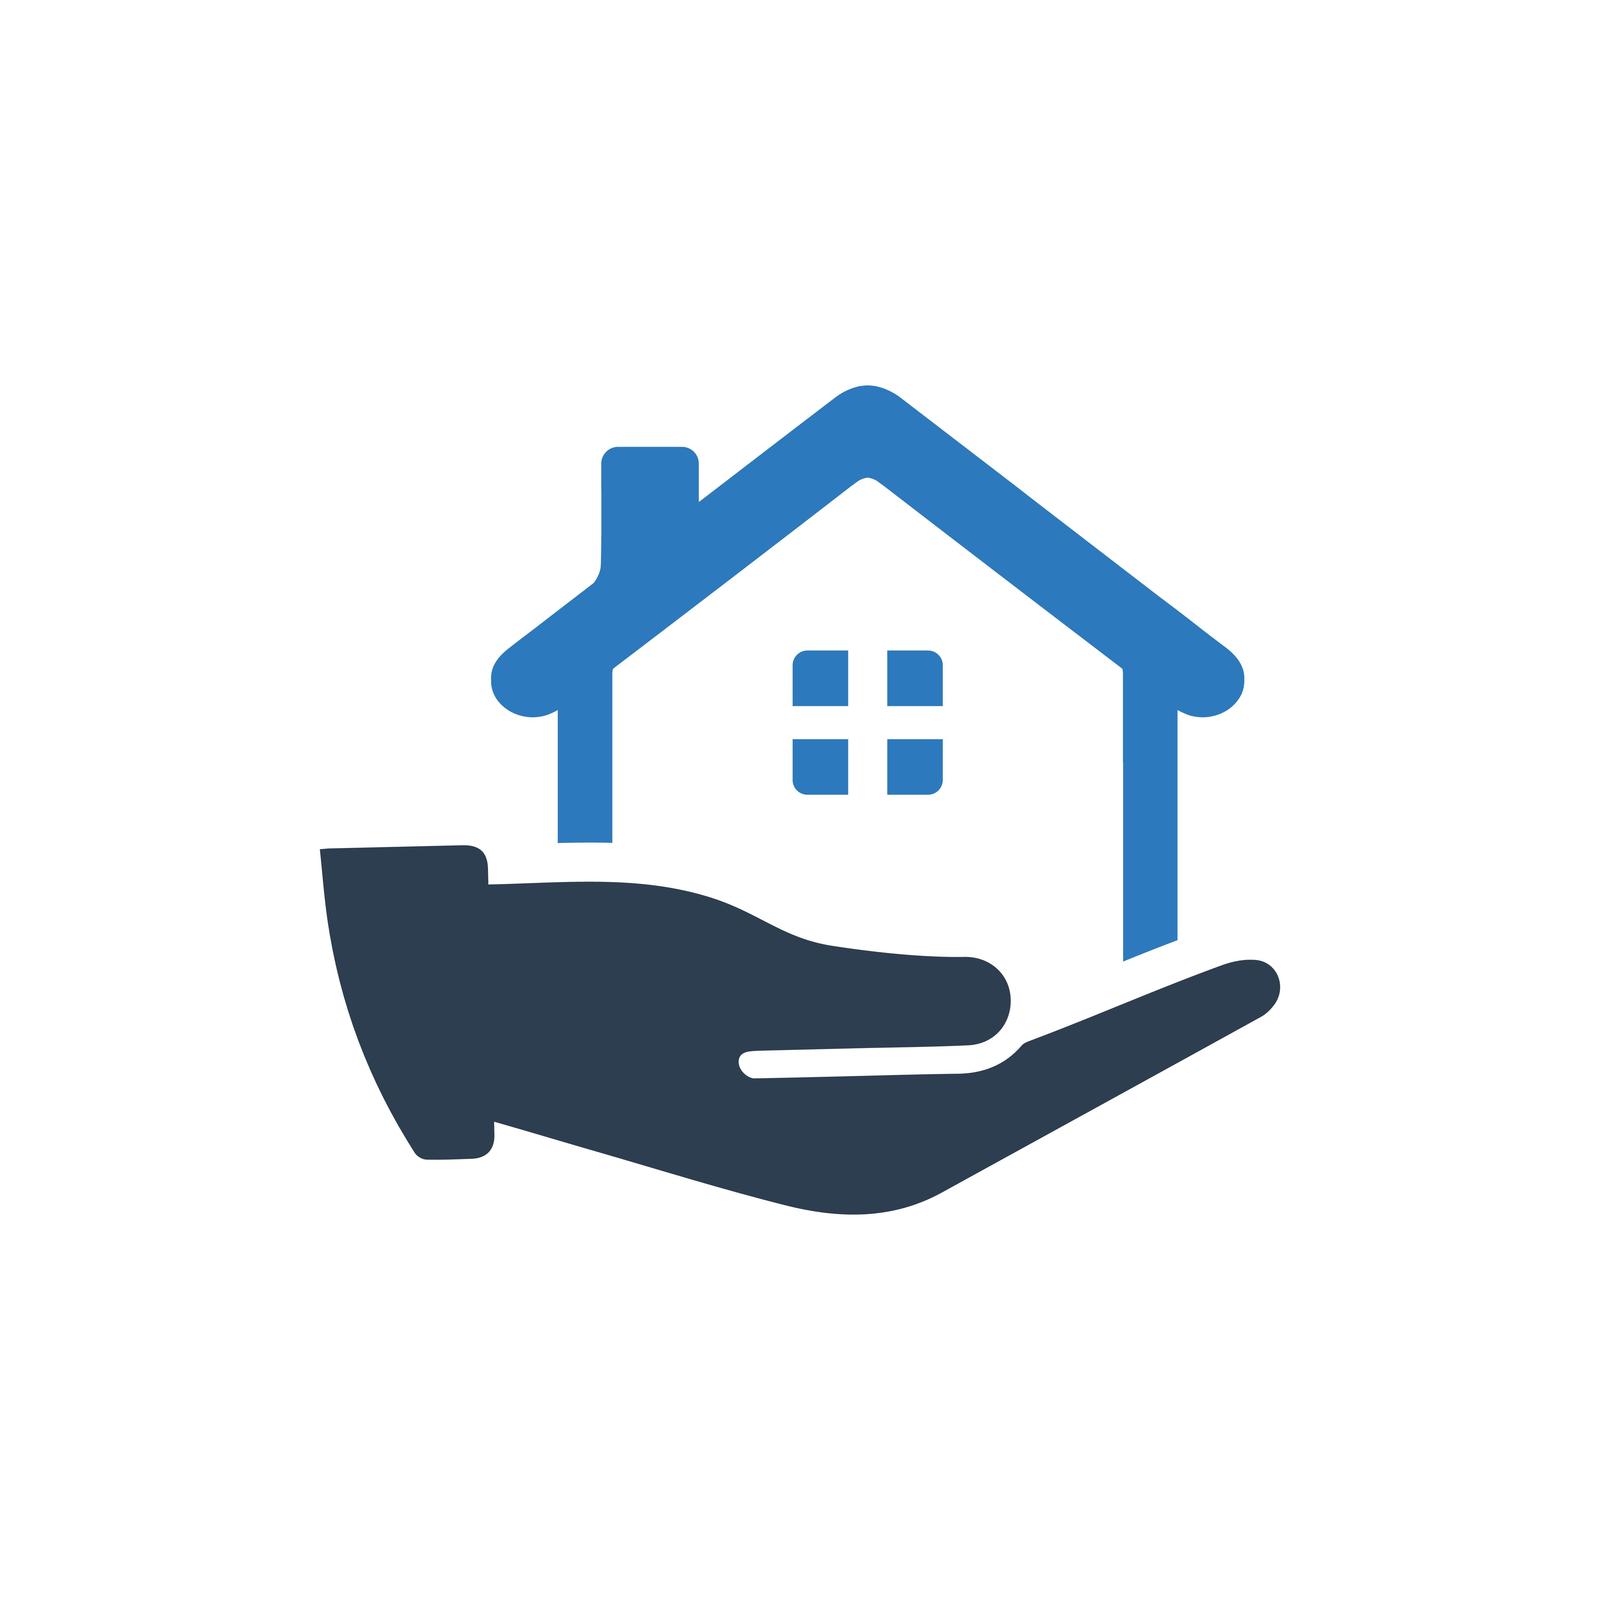 Home Insurance in Palm of Hand image